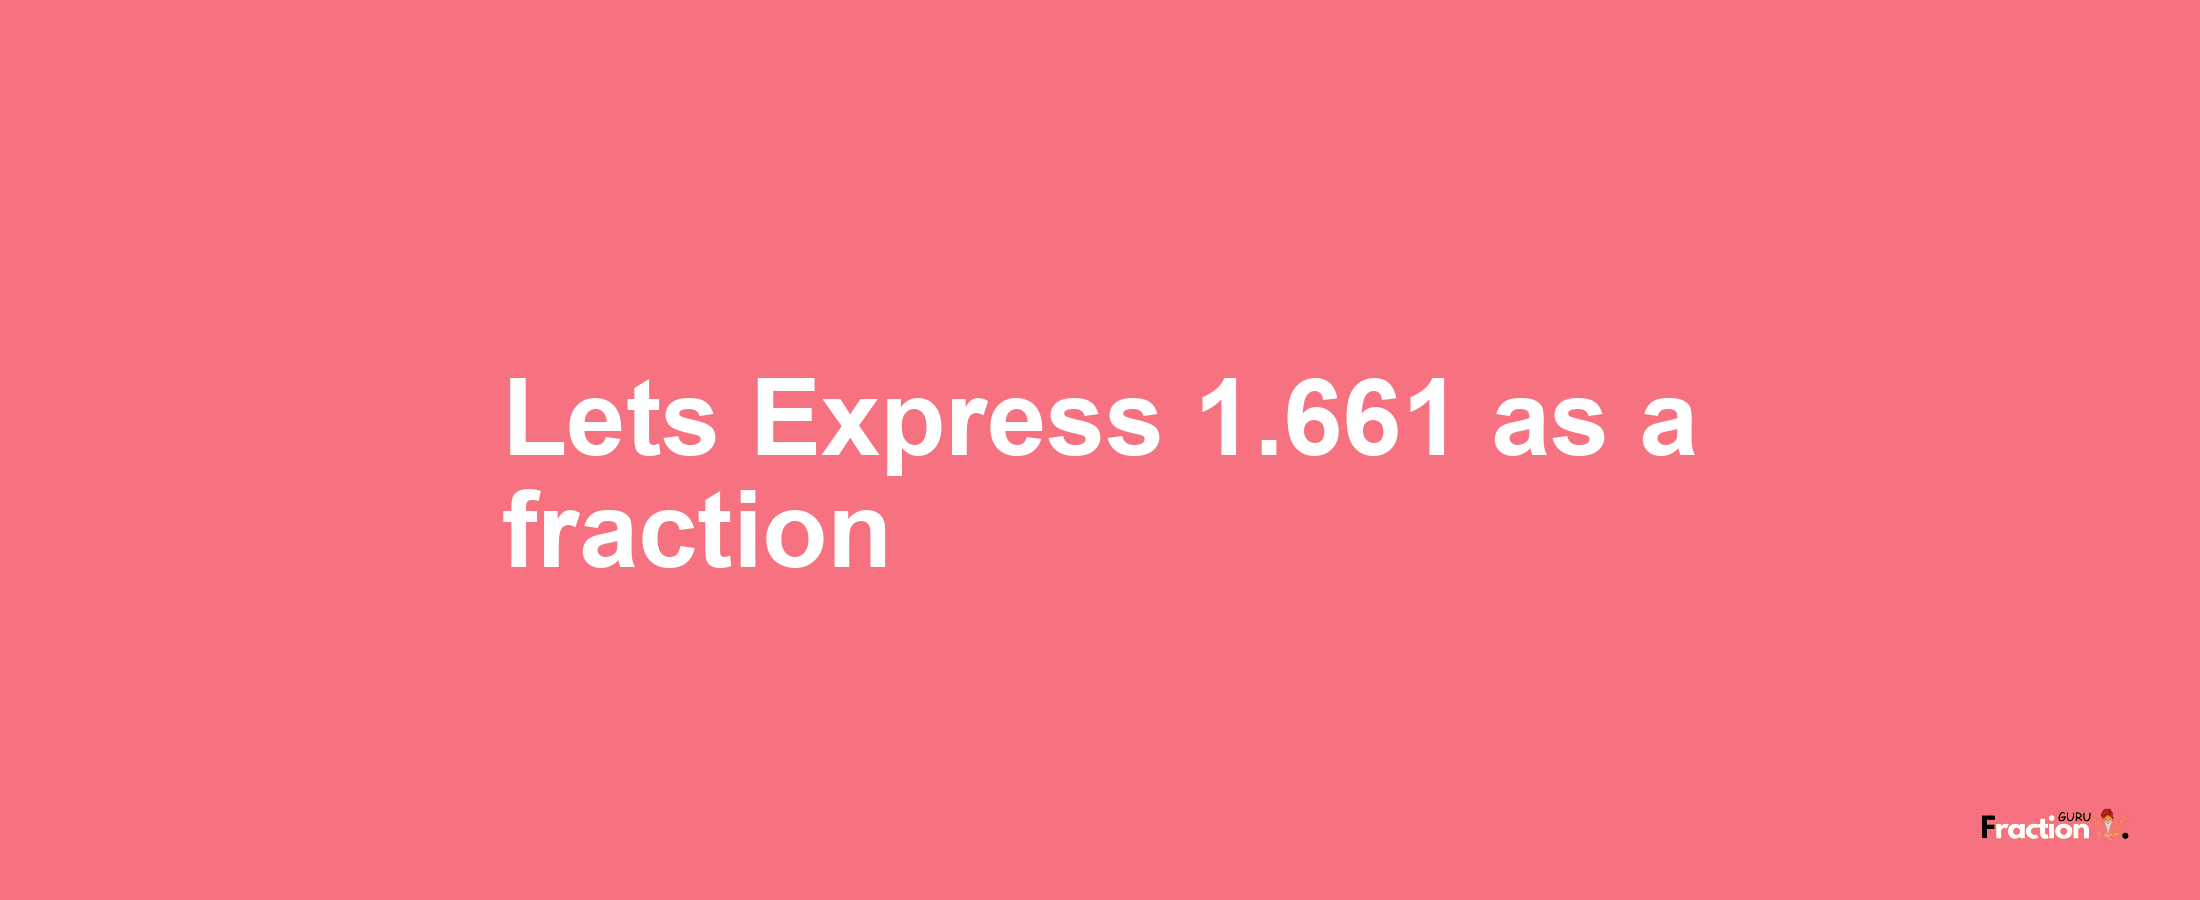 Lets Express 1.661 as afraction